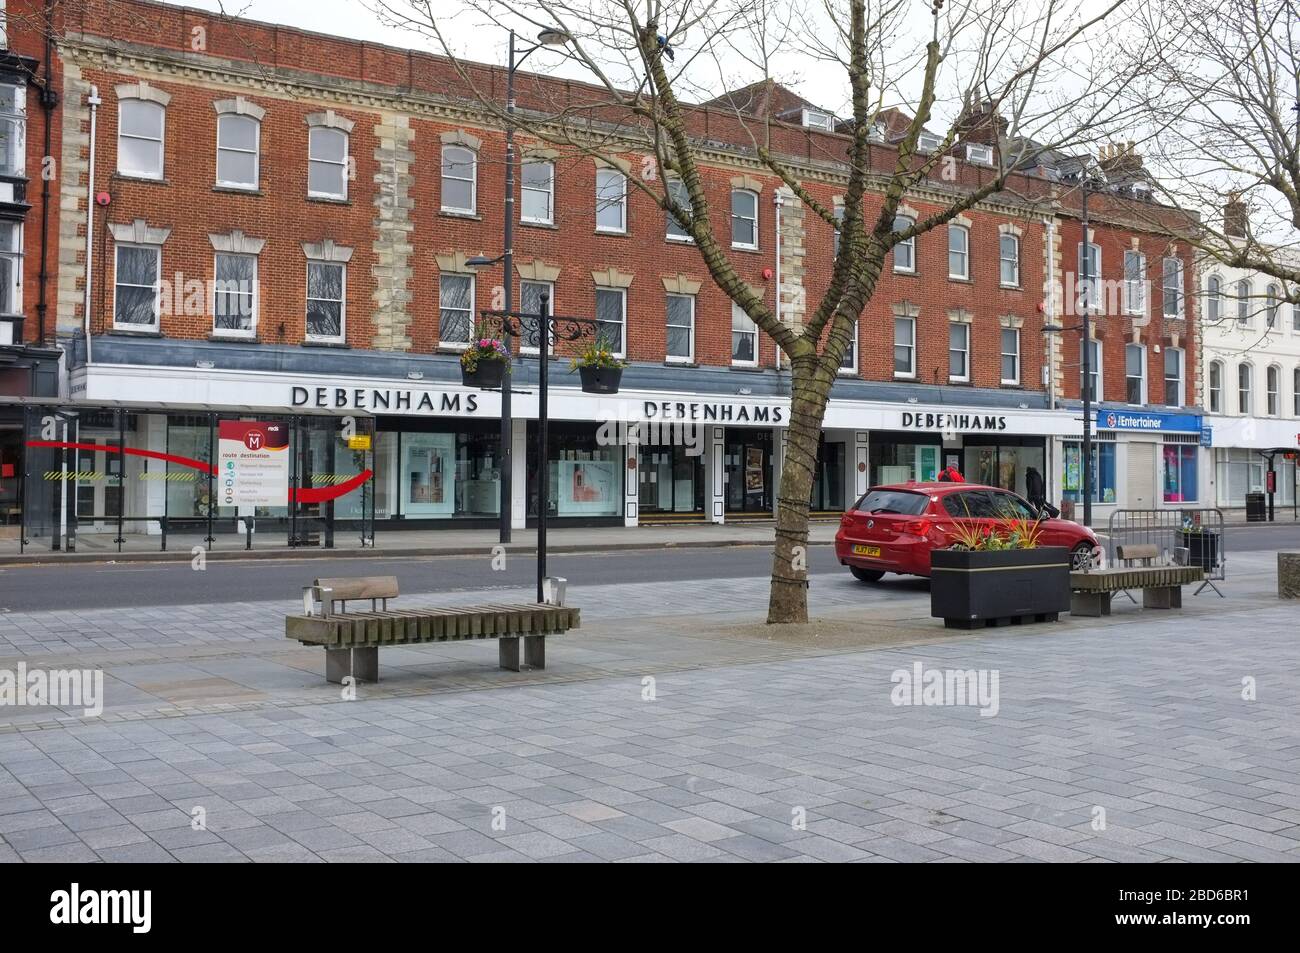 Debenhams store in Salisbury, Wiltshire. UK April 2020. Formerly Style and Gerrish, the famous department store has been a famous landmark for years. Stock Photo